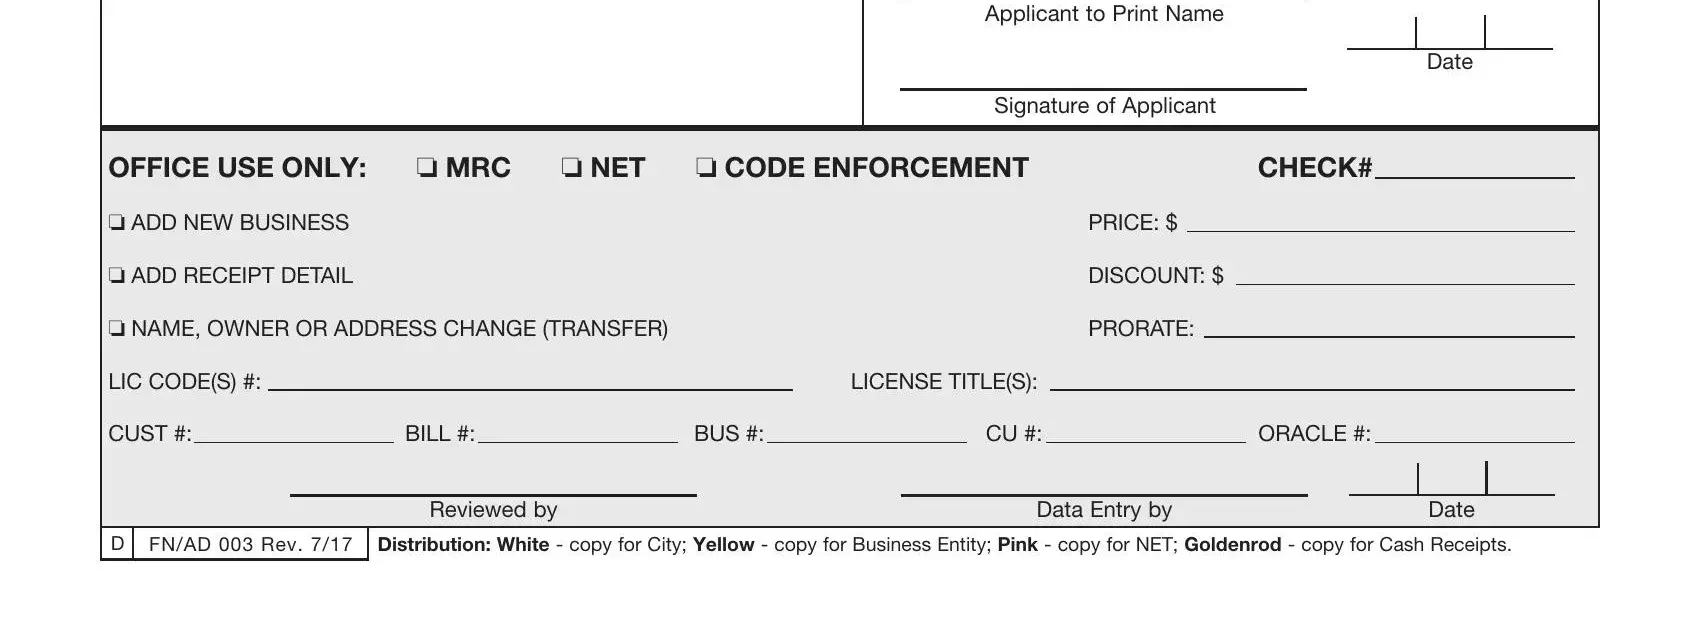 local business tax receipt application Applicant to Print Name, Signature of Applicant, Date, OFFICE USE ONLY: o MRC, o NET, o CODE ENFORCEMENT, CHECK#, o ADD NEW BUSINESS, o ADD RECEIPT DETAIL, o NAME, LIC CODE(S) #:, LICENSE TITLE(S):, PRICE: $, DISCOUNT: $, PRORATE:, CUST #:, BILL #:, BUS #:, CU #:, ORACLE #:, D FN/AD 003 Rev, Reviewed by, Data Entry by, and Date fields to insert